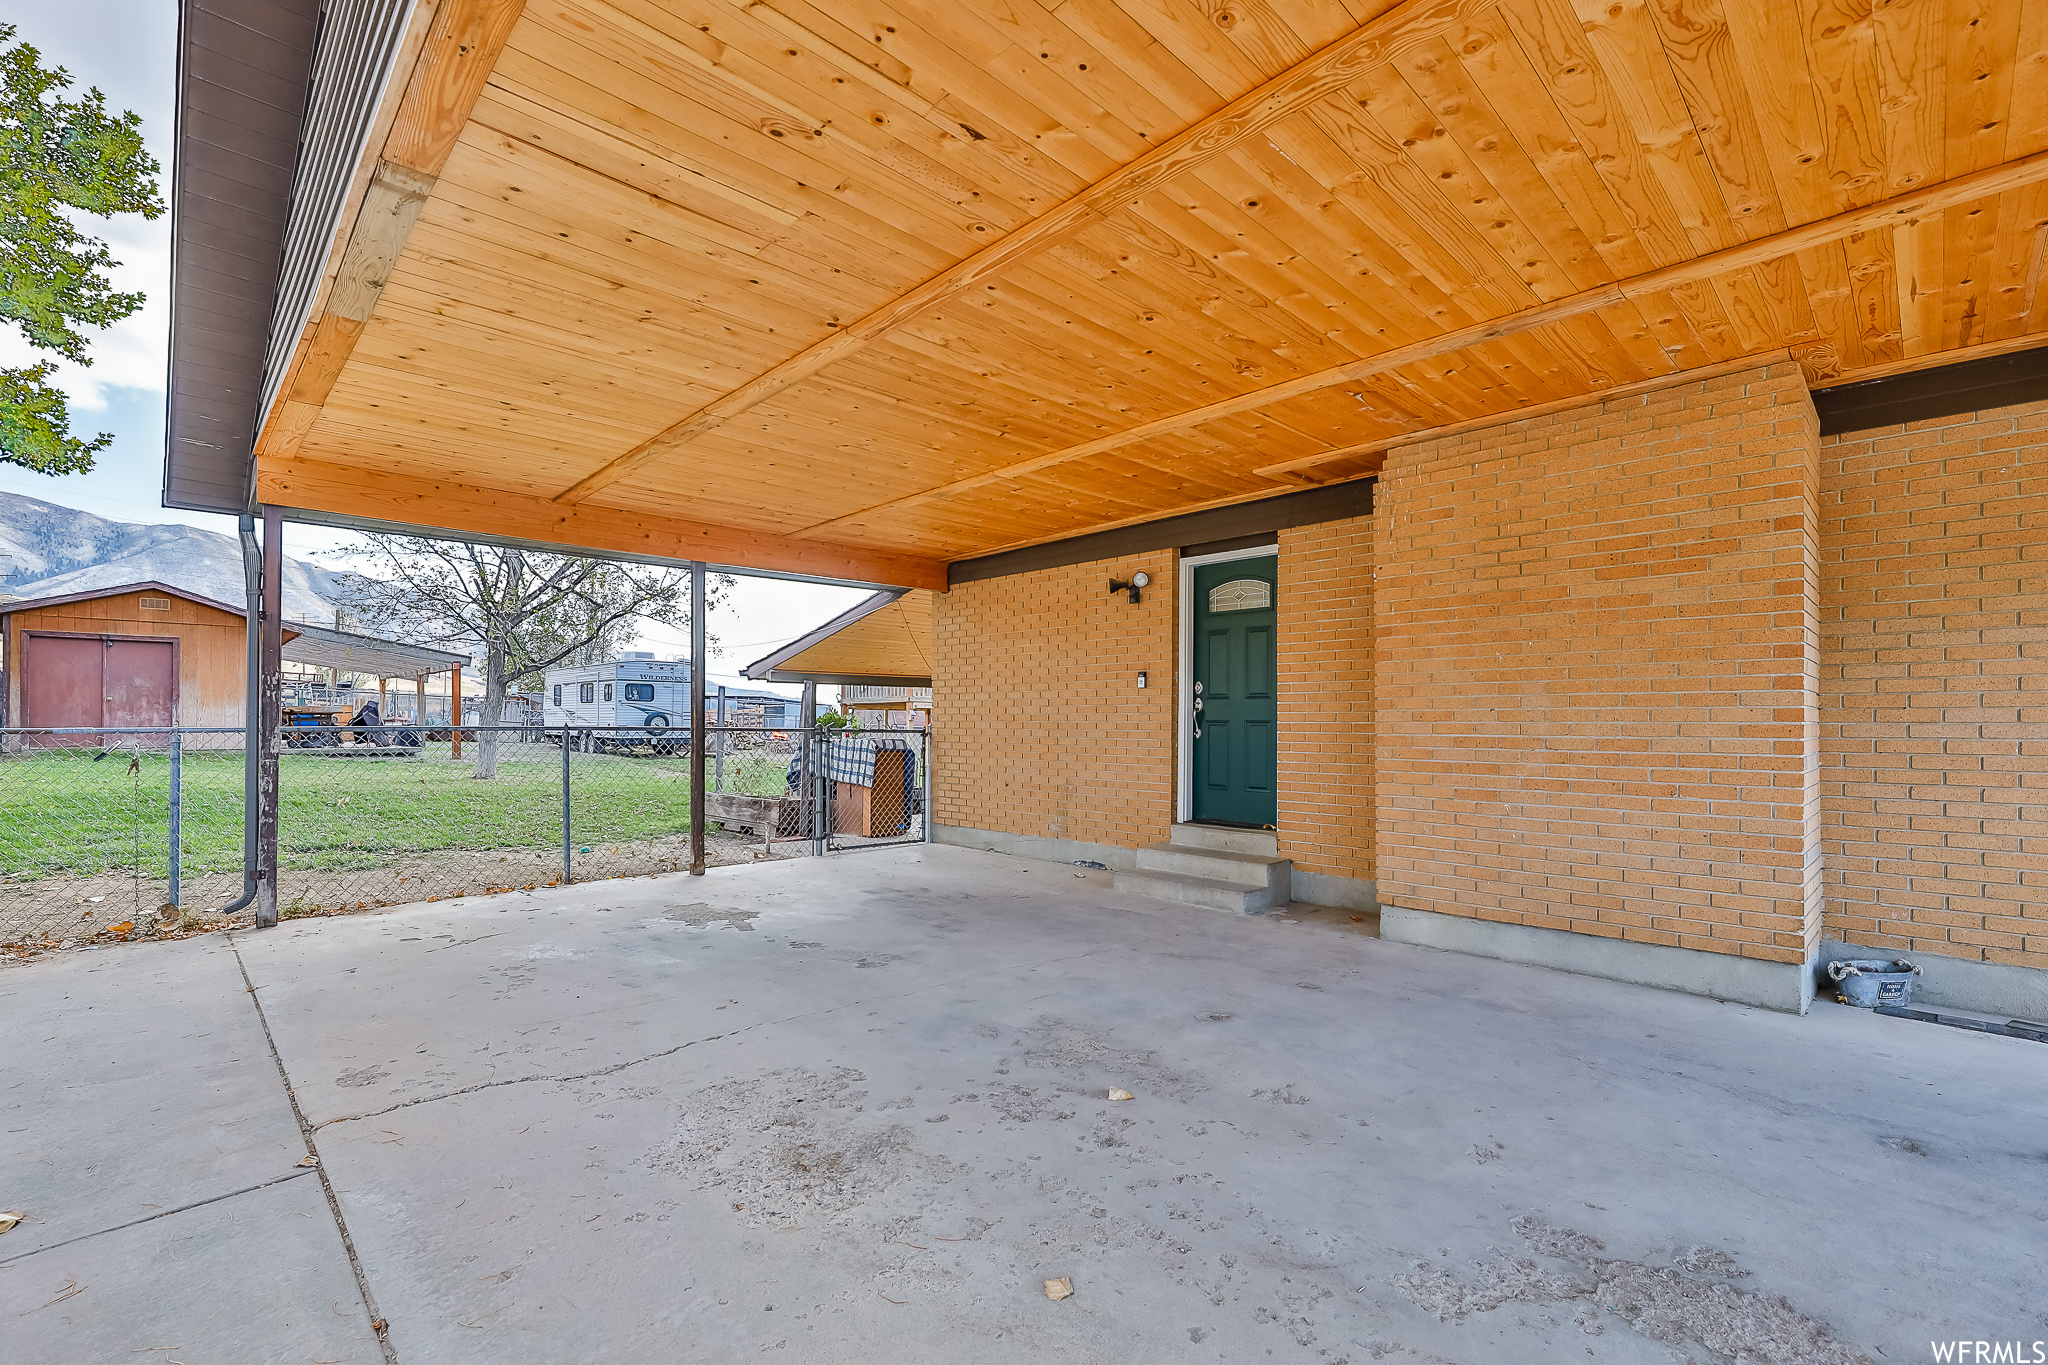 Carport with side entrance